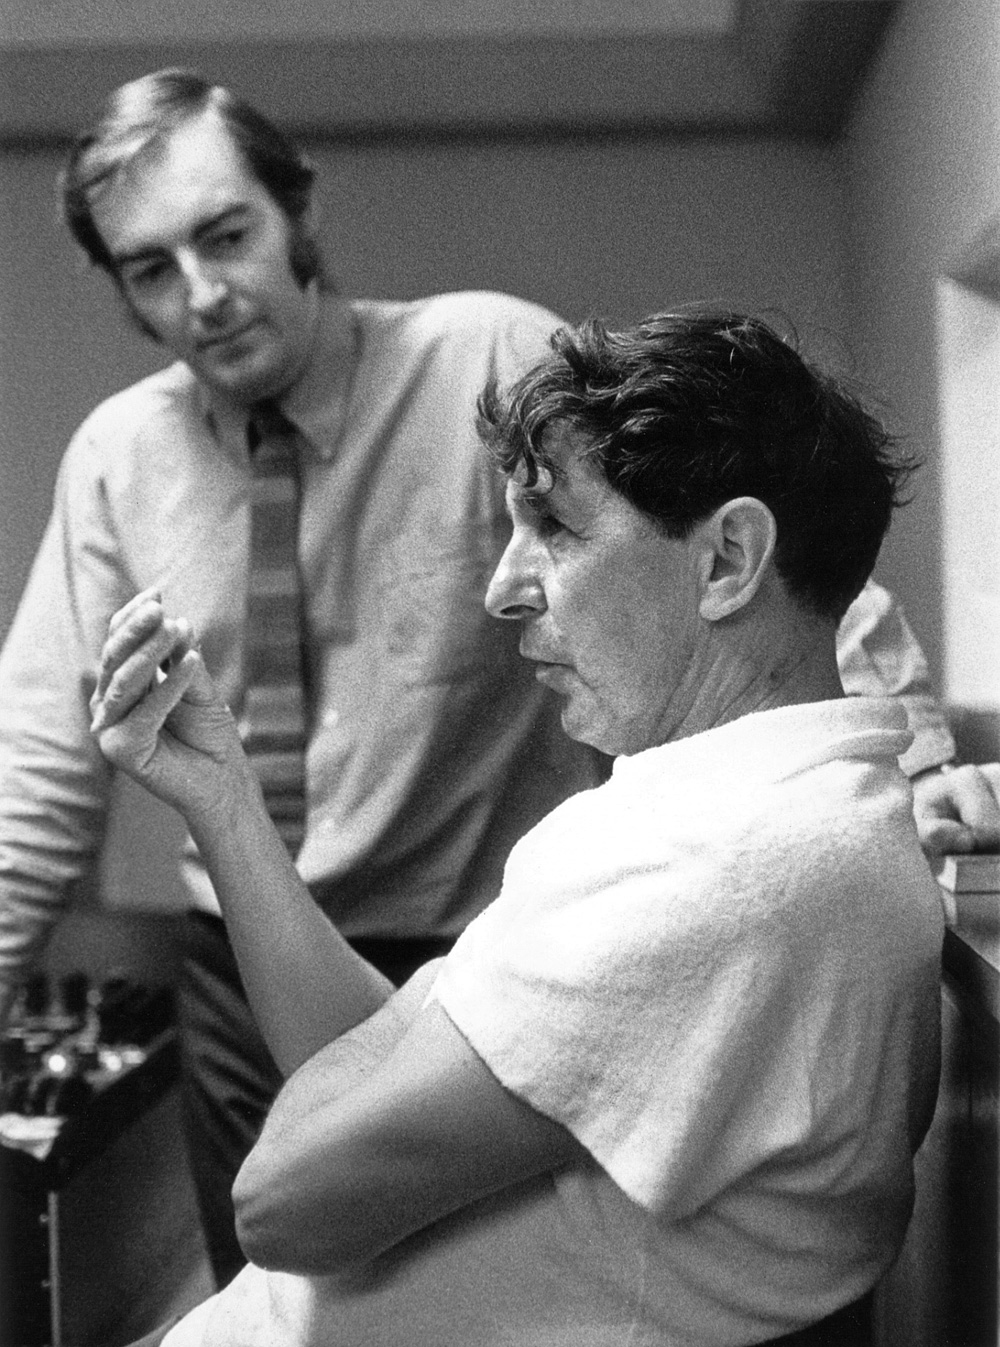 Kevin with composer Sir Michael Tippett